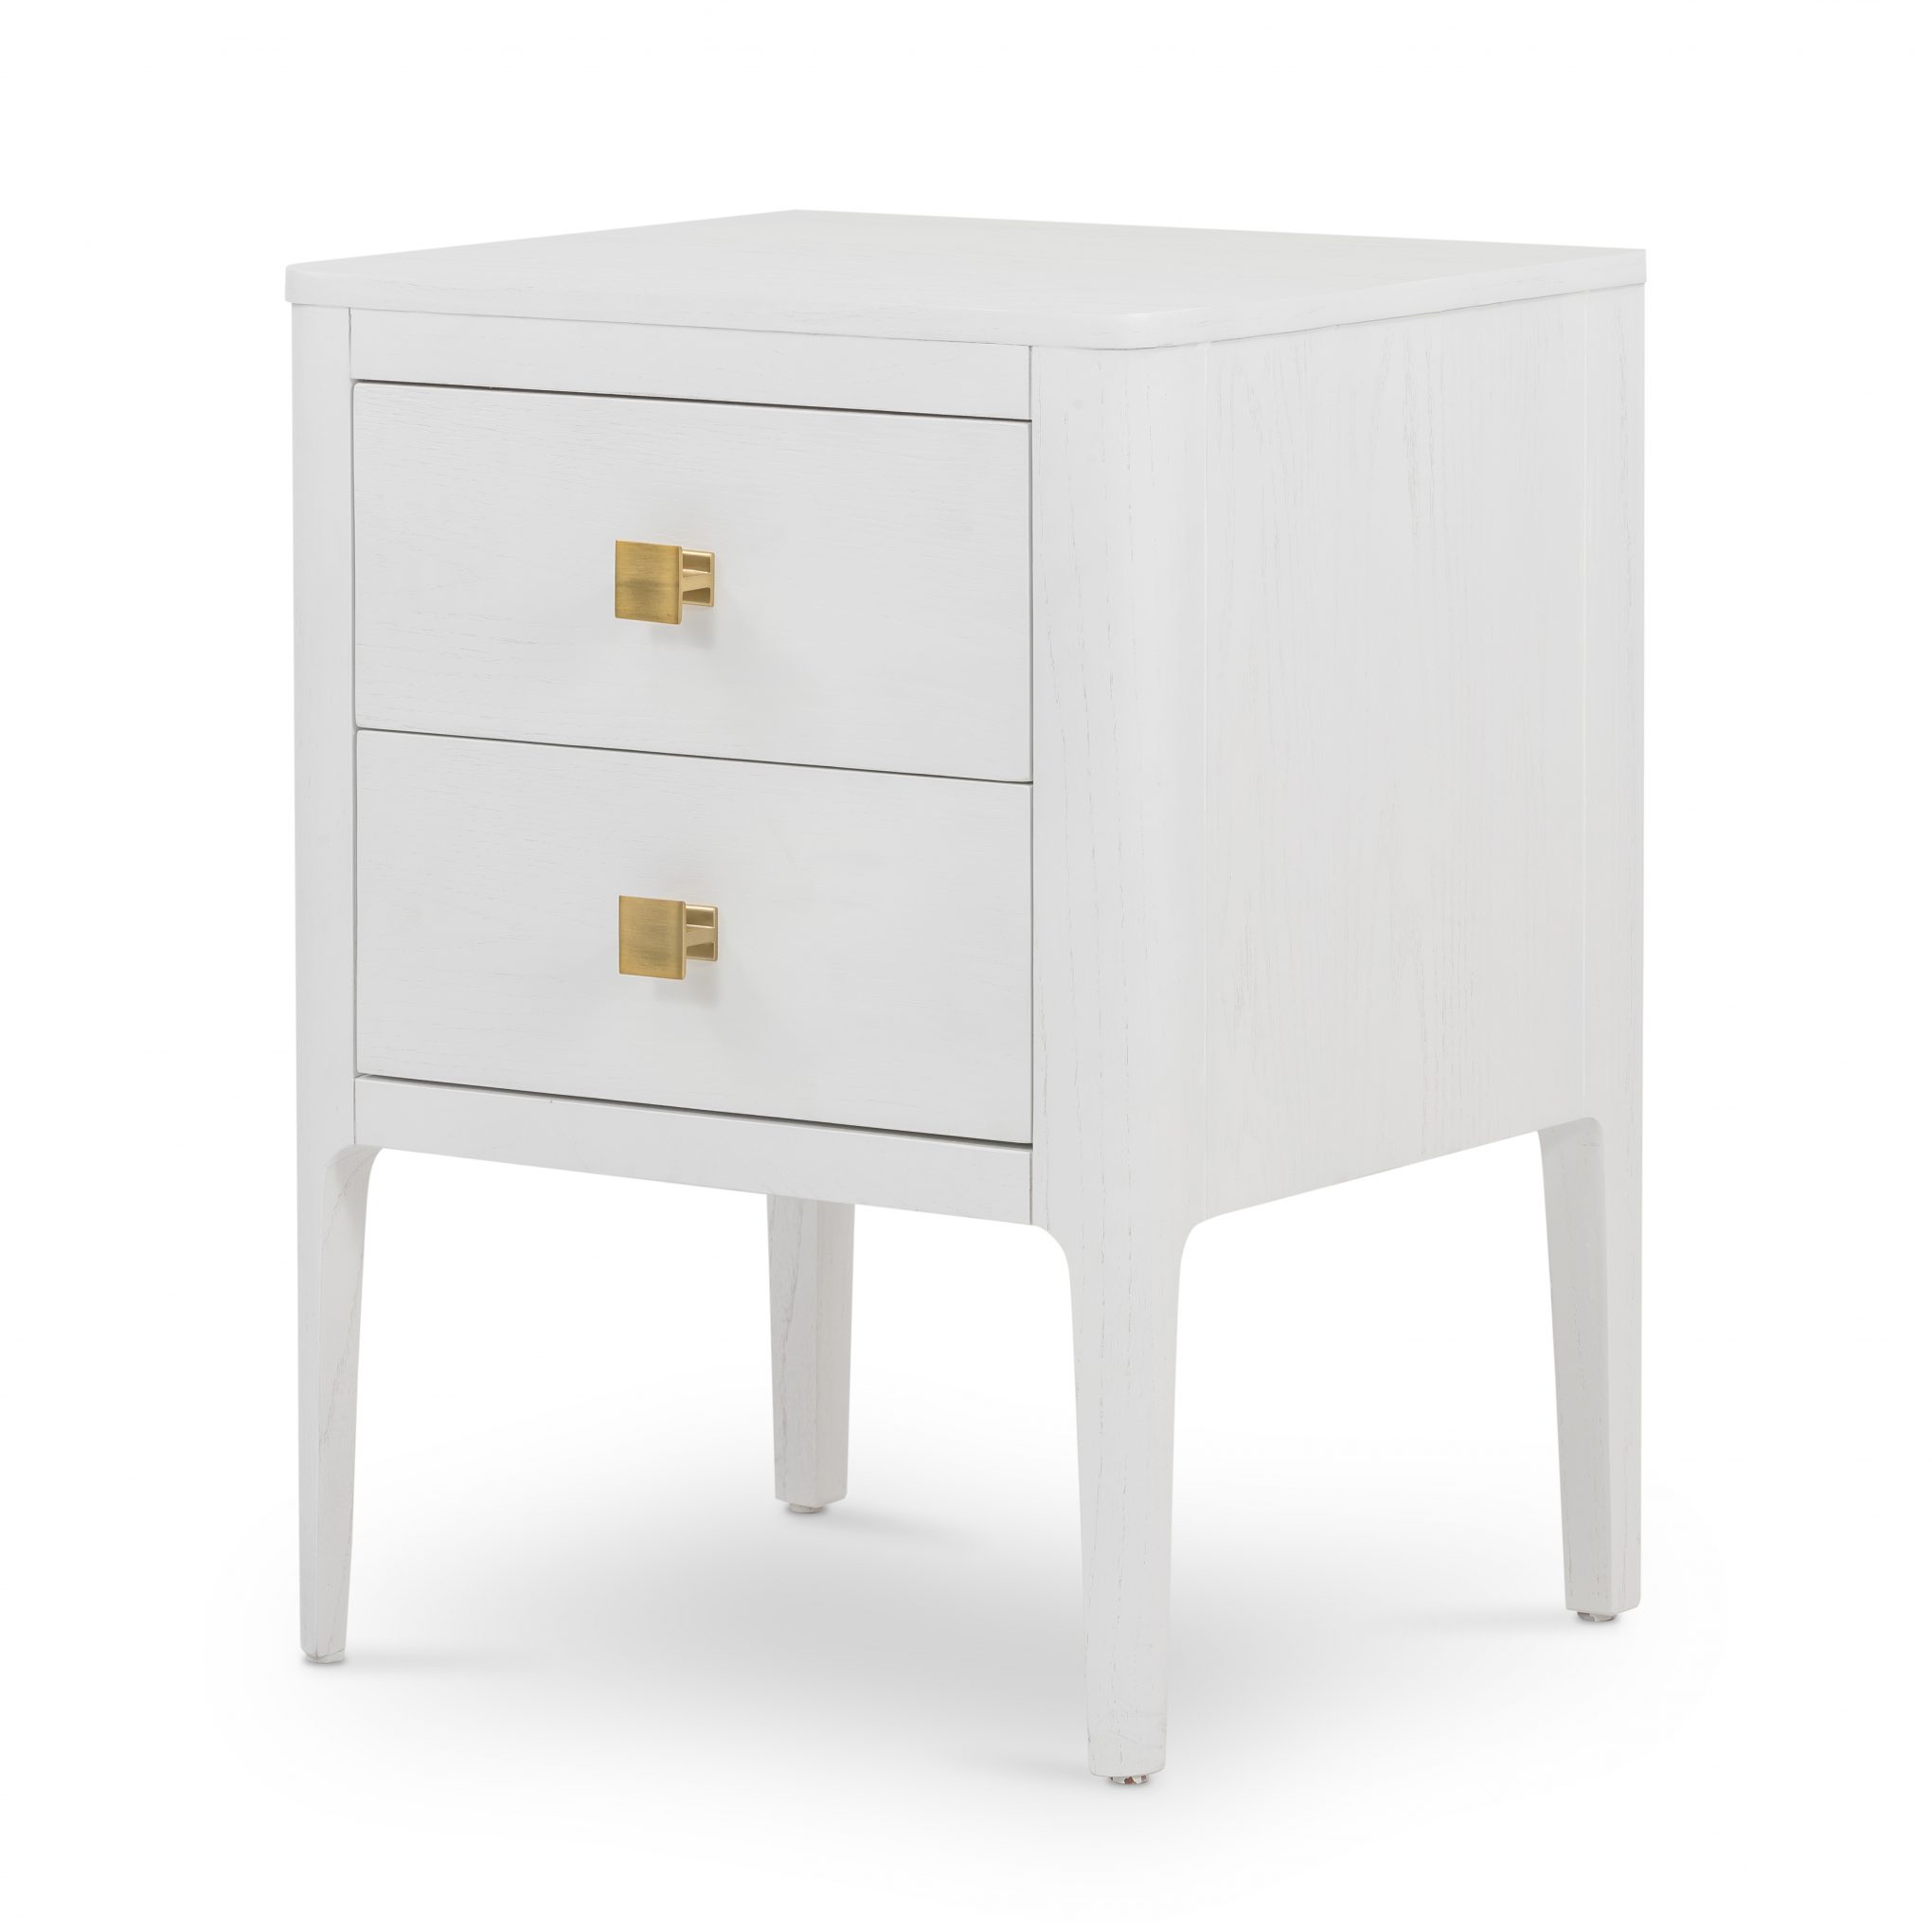 Abberley Bedside | White - DI Designs white bedside table